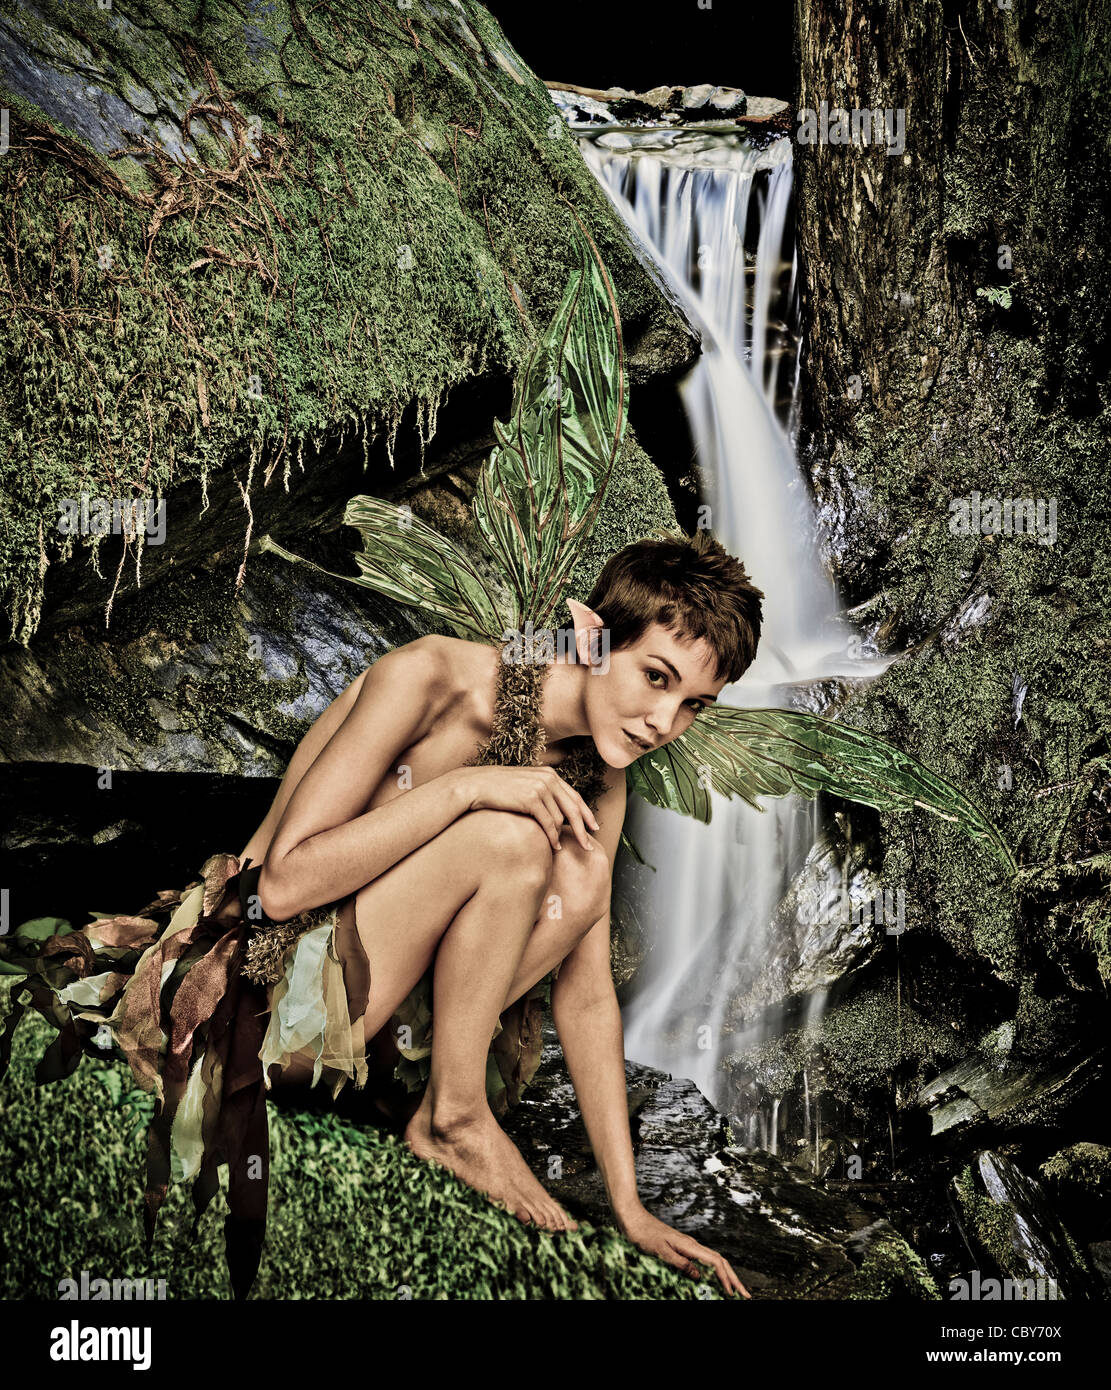 Faerie (pixie) on moss covered rock near small waterfall. Stock Photo